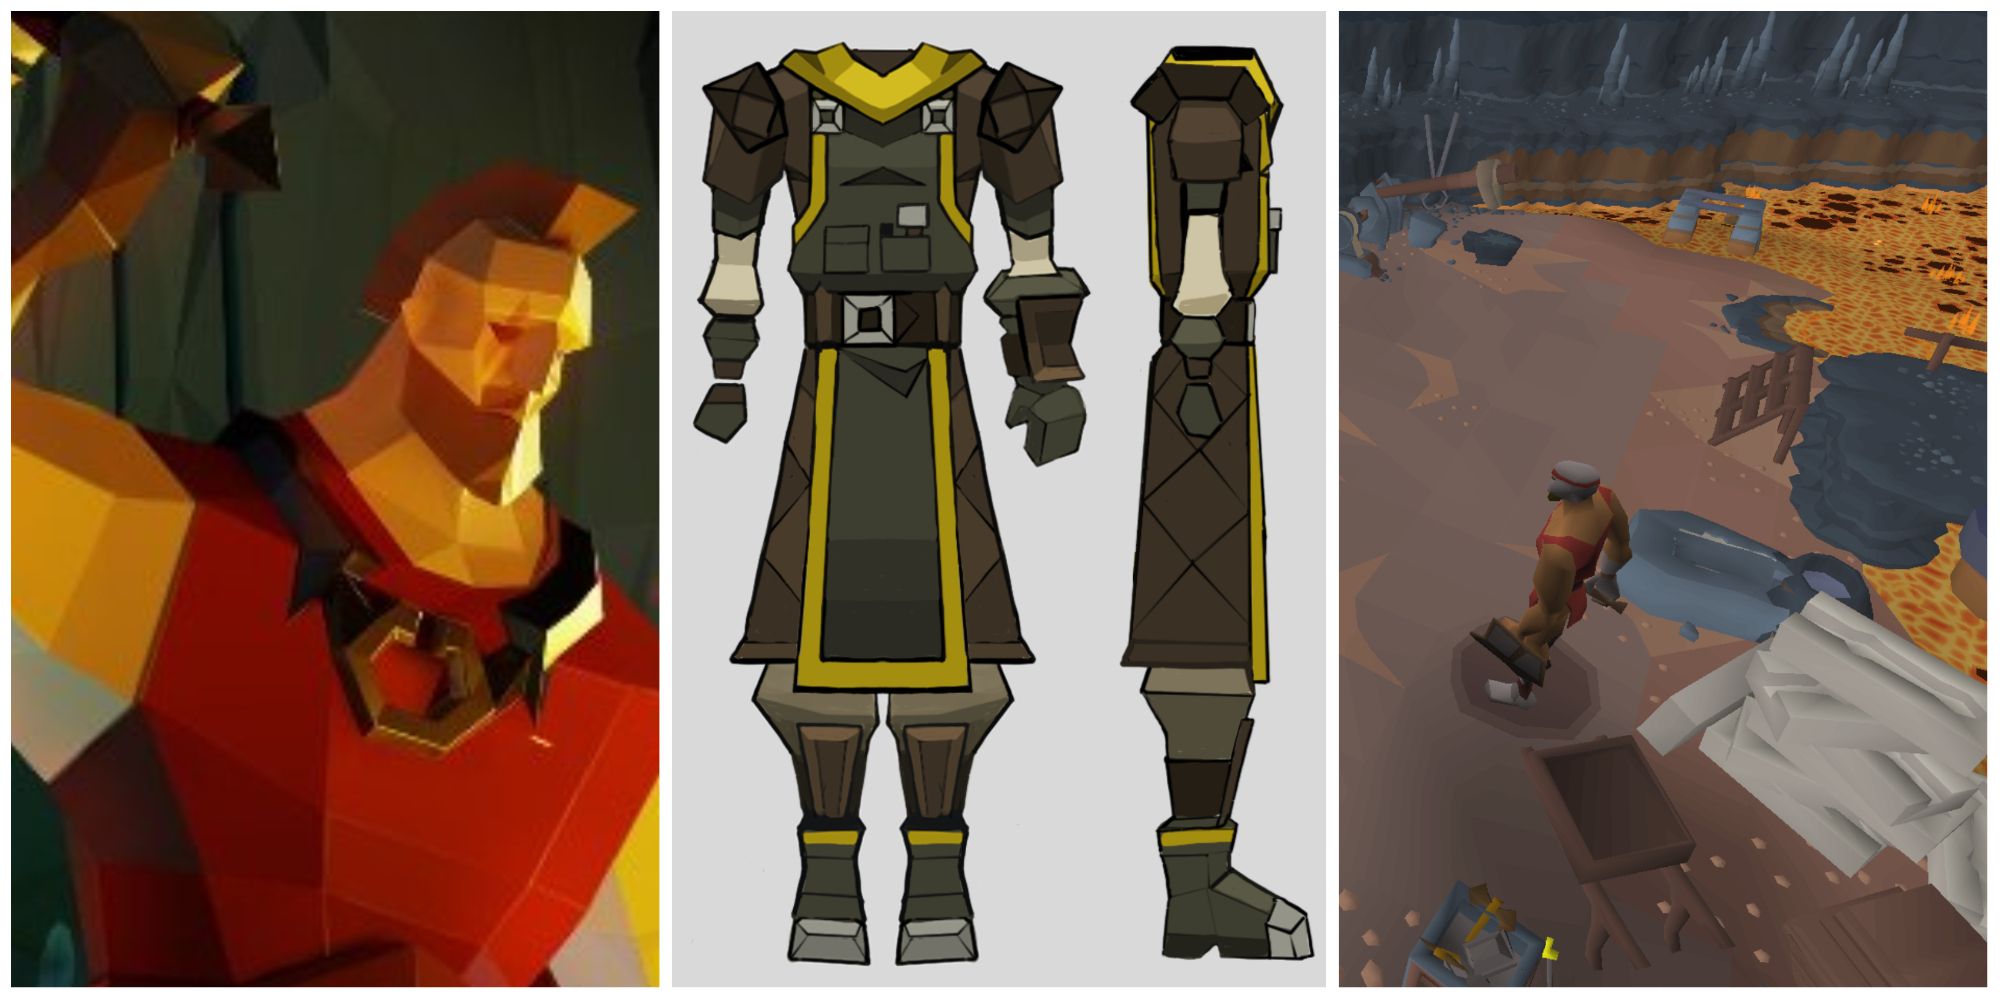 Split feature image featuring a low-poly render of Kovac the Hill Giant, concept art for the Smiths Uniform, and a screenshot of the Giants Foundry